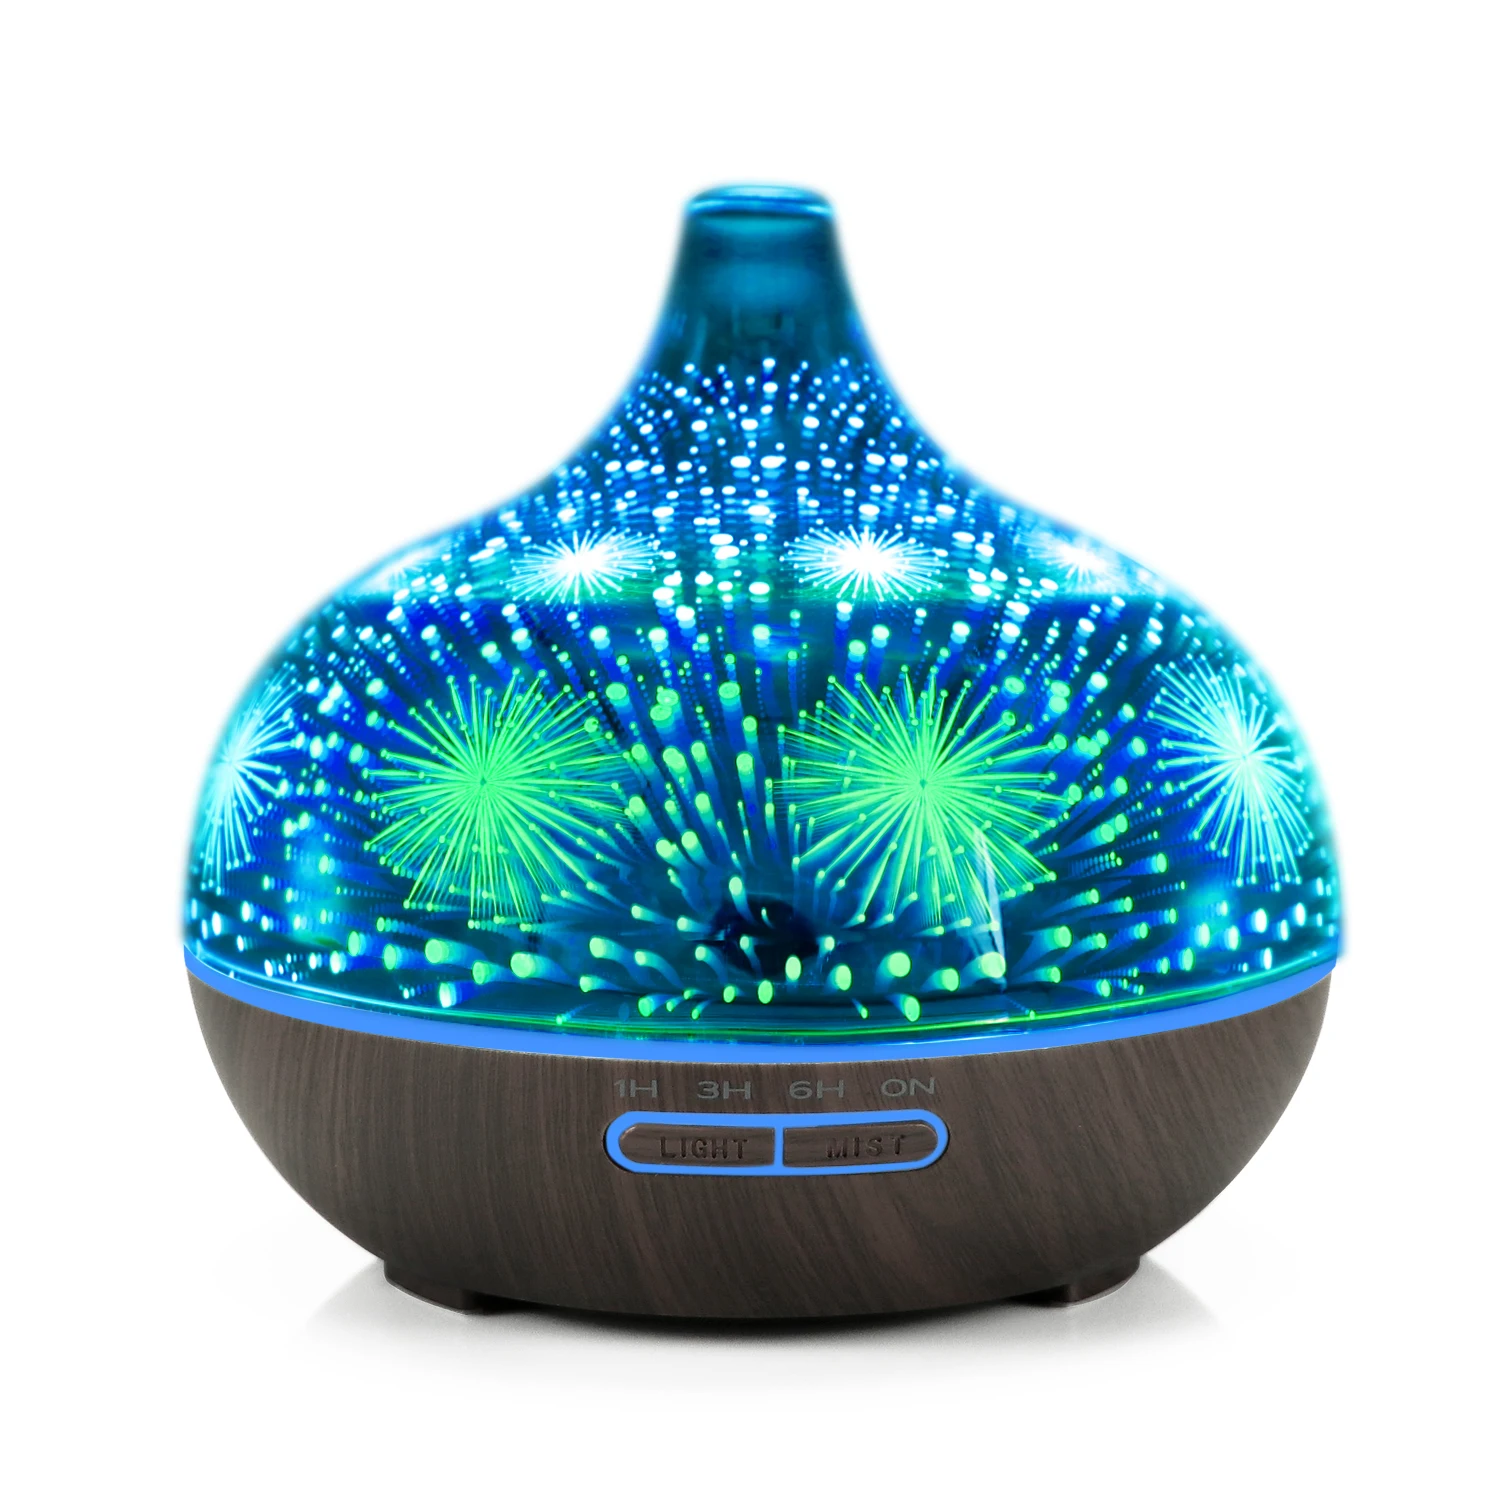 00ml Ultrasonic Humidifier With Remote Control 3D Electric Aromatherapy Essential Oil Air Diffuser Glass Diffusers For Rooms - Цвет: Fireworks-C